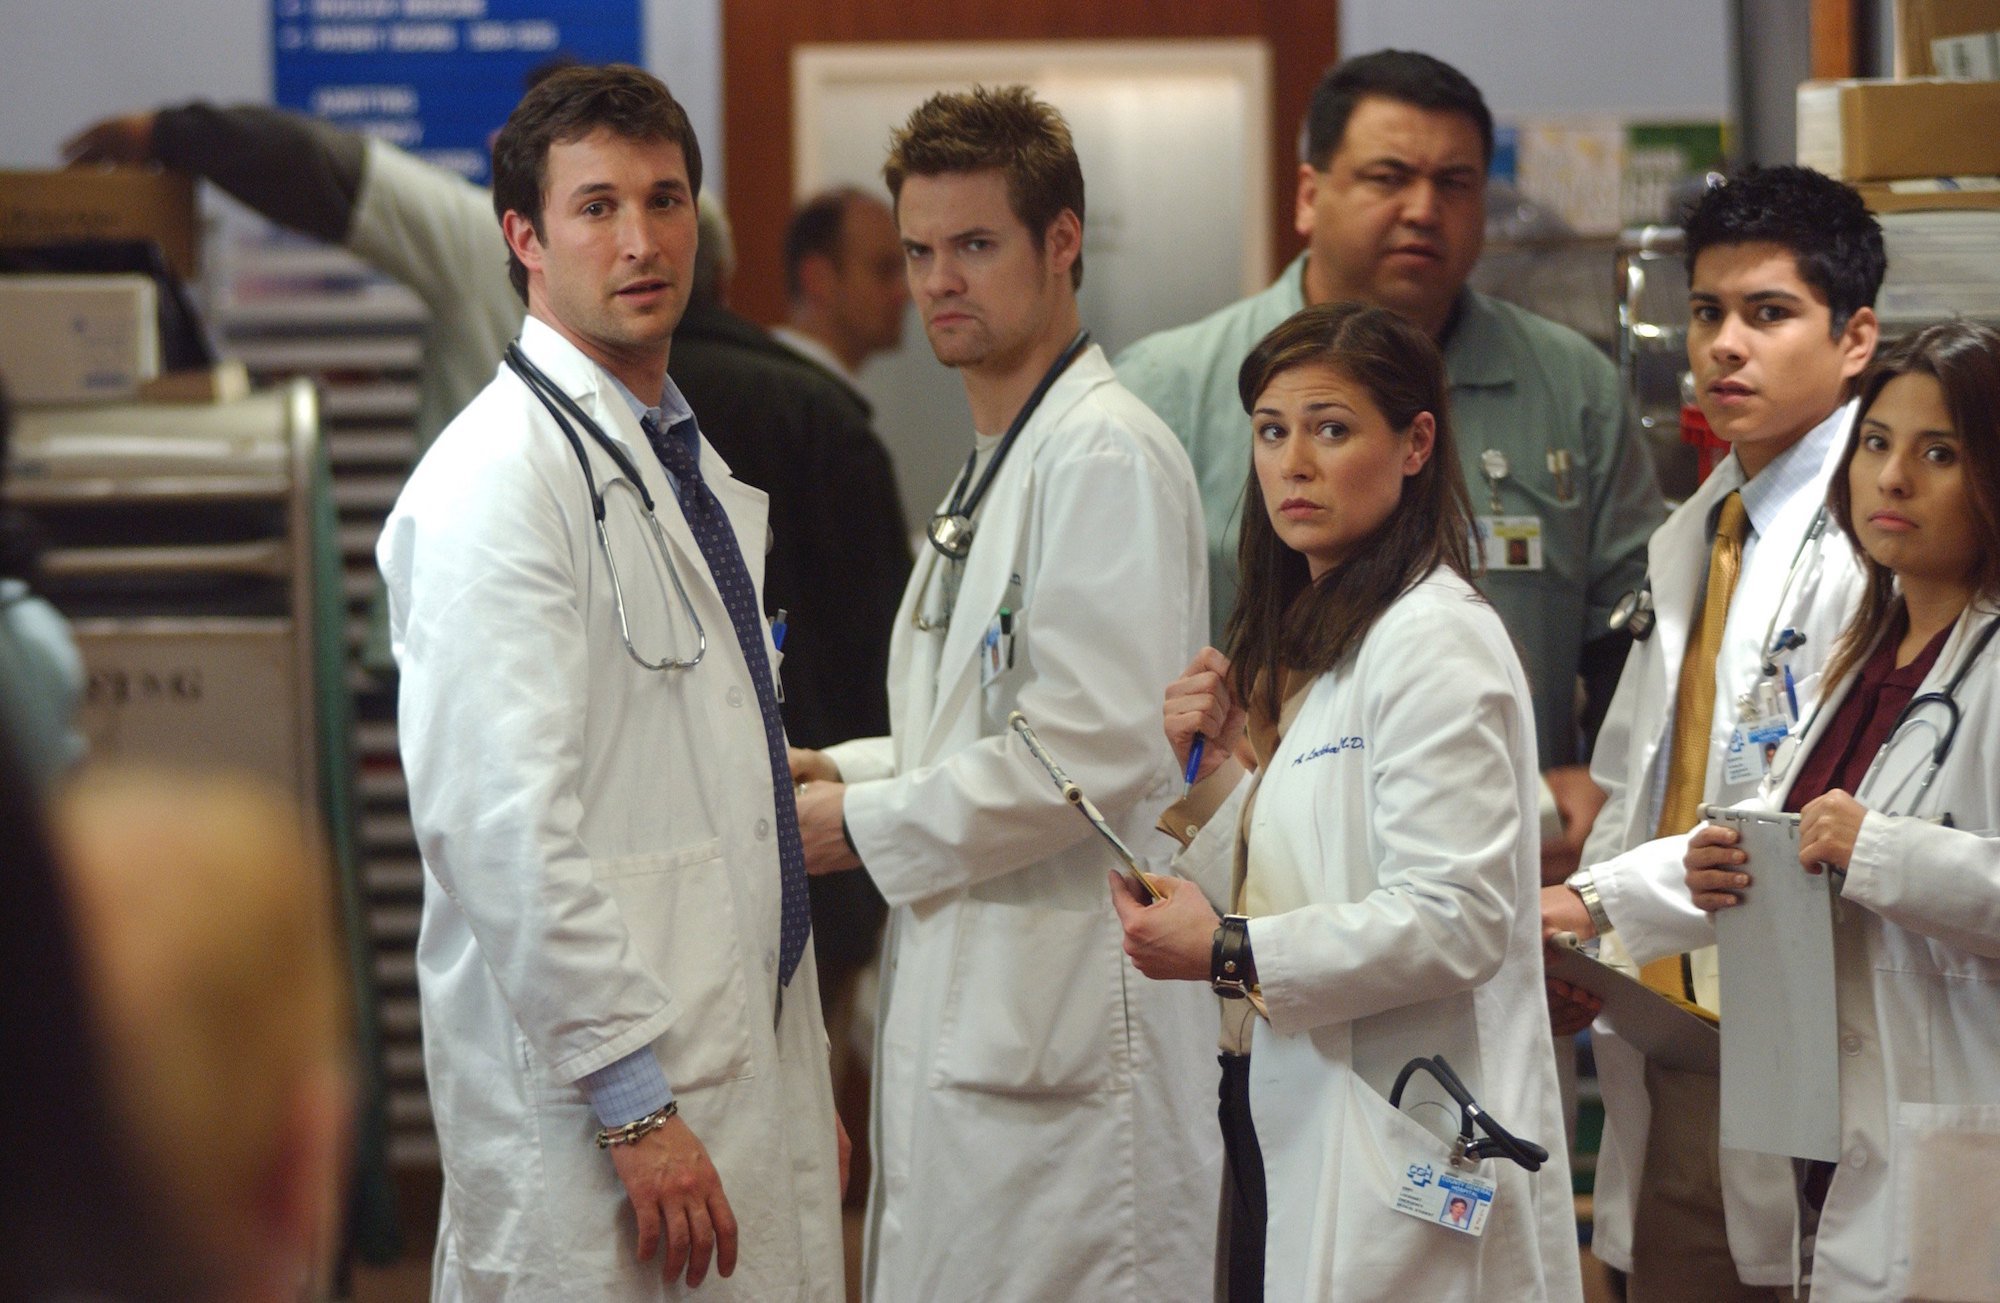 (L-R) Noah Wyle as Doctor John Carter, Shane West as Doctor Ray Barnett, Maura Tierney as Doctor Abby Lockhart, all looking confused and surprised